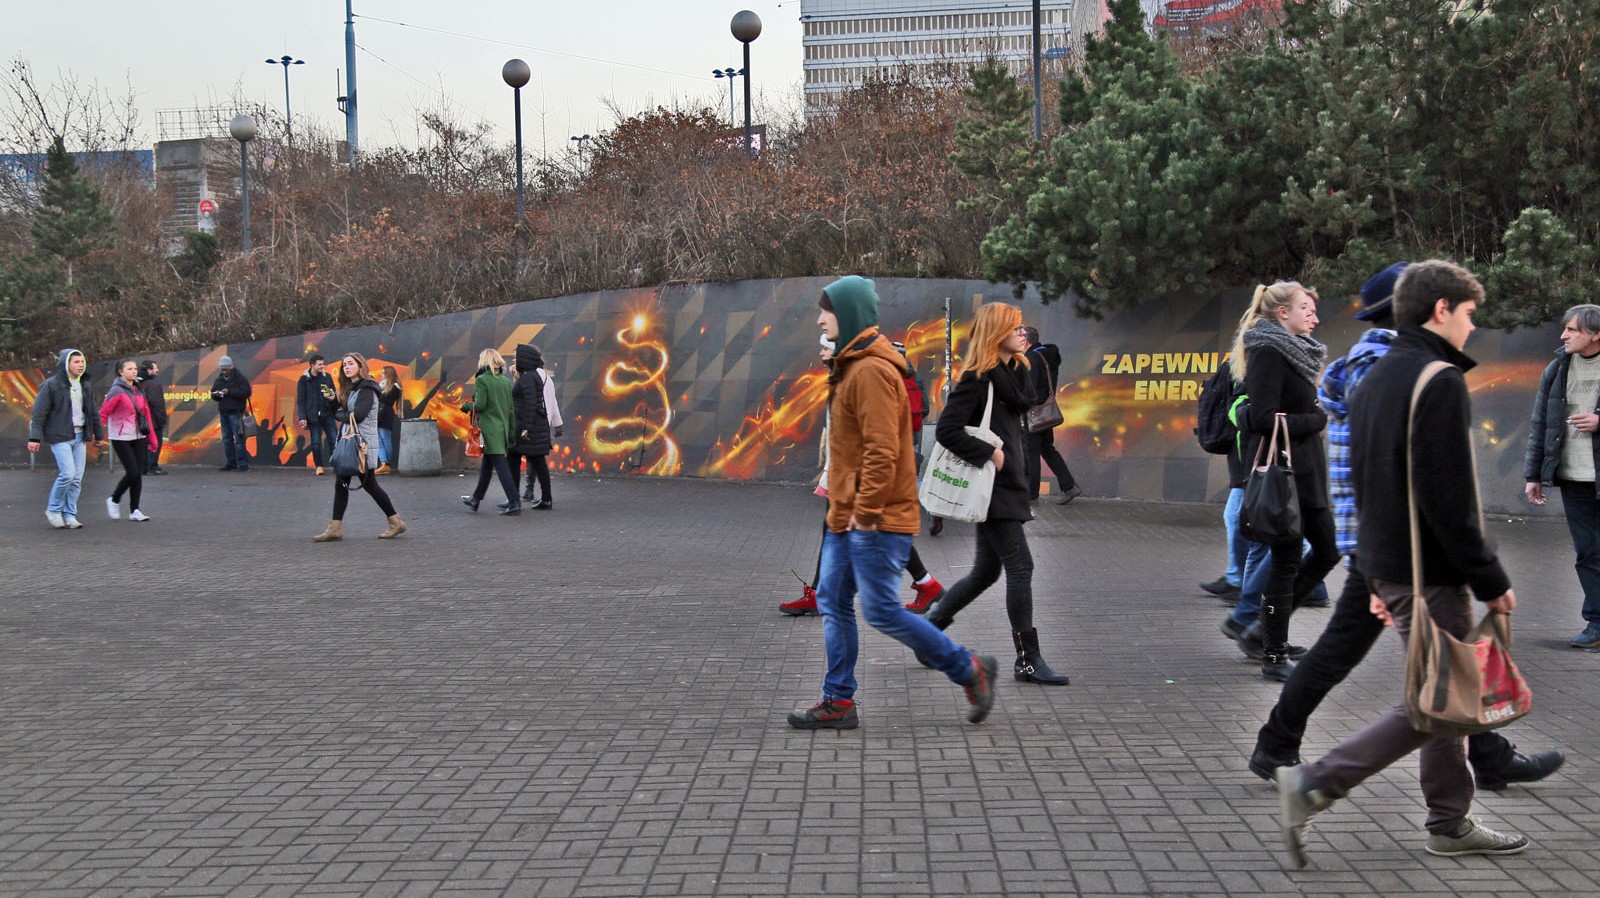 Square at centrum subway station in Warsaw mural on the wall | We provide energy | Portfolio